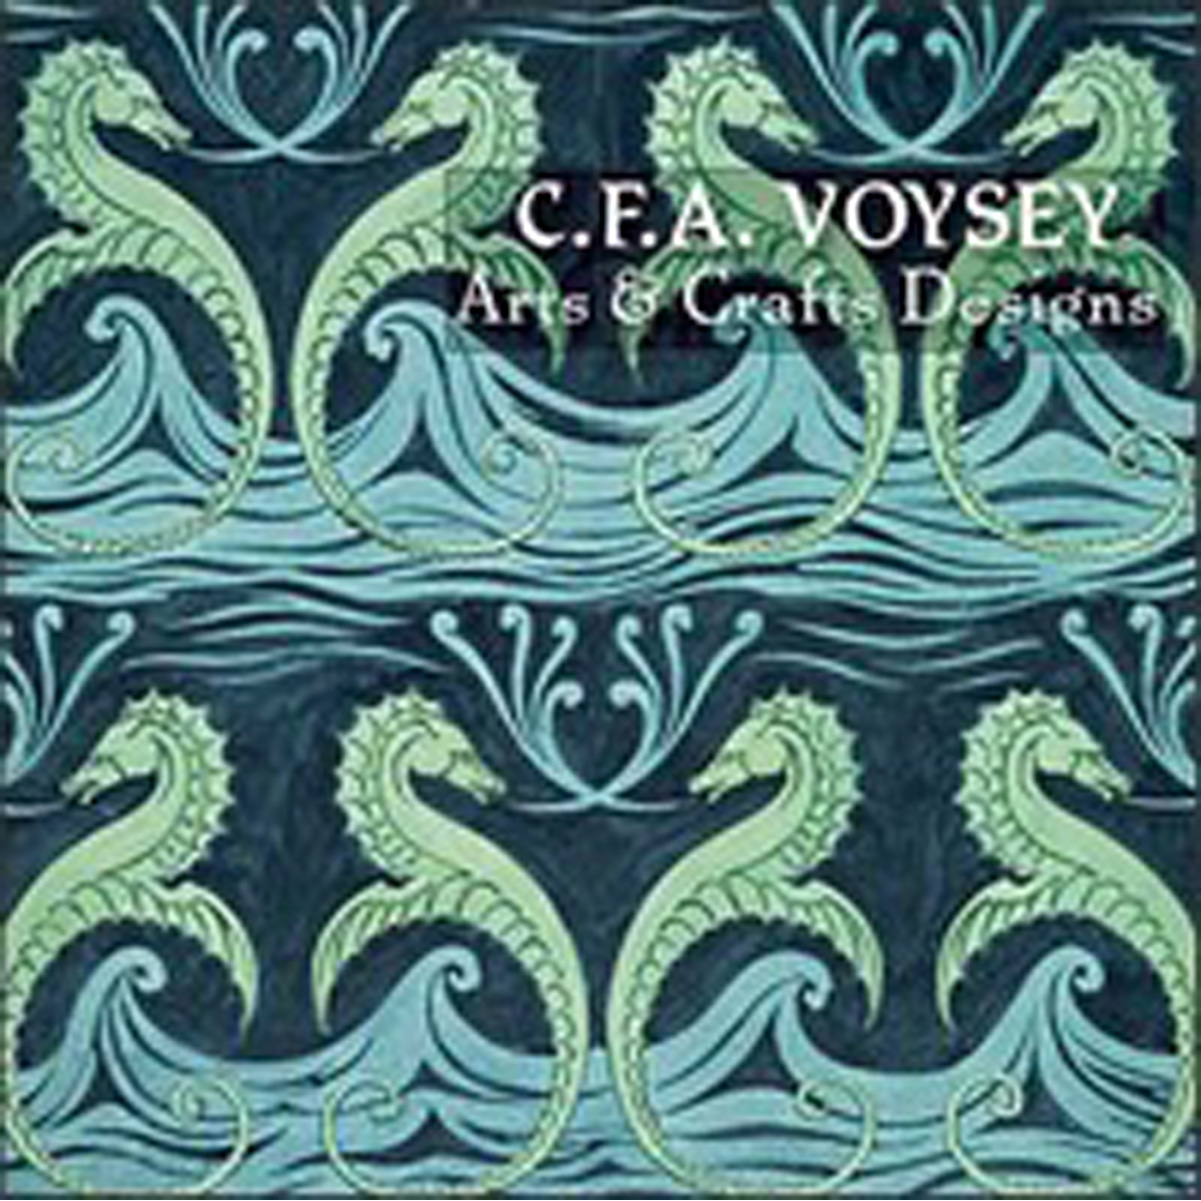 Cfa Voysey Boxed Set Of Note Cards